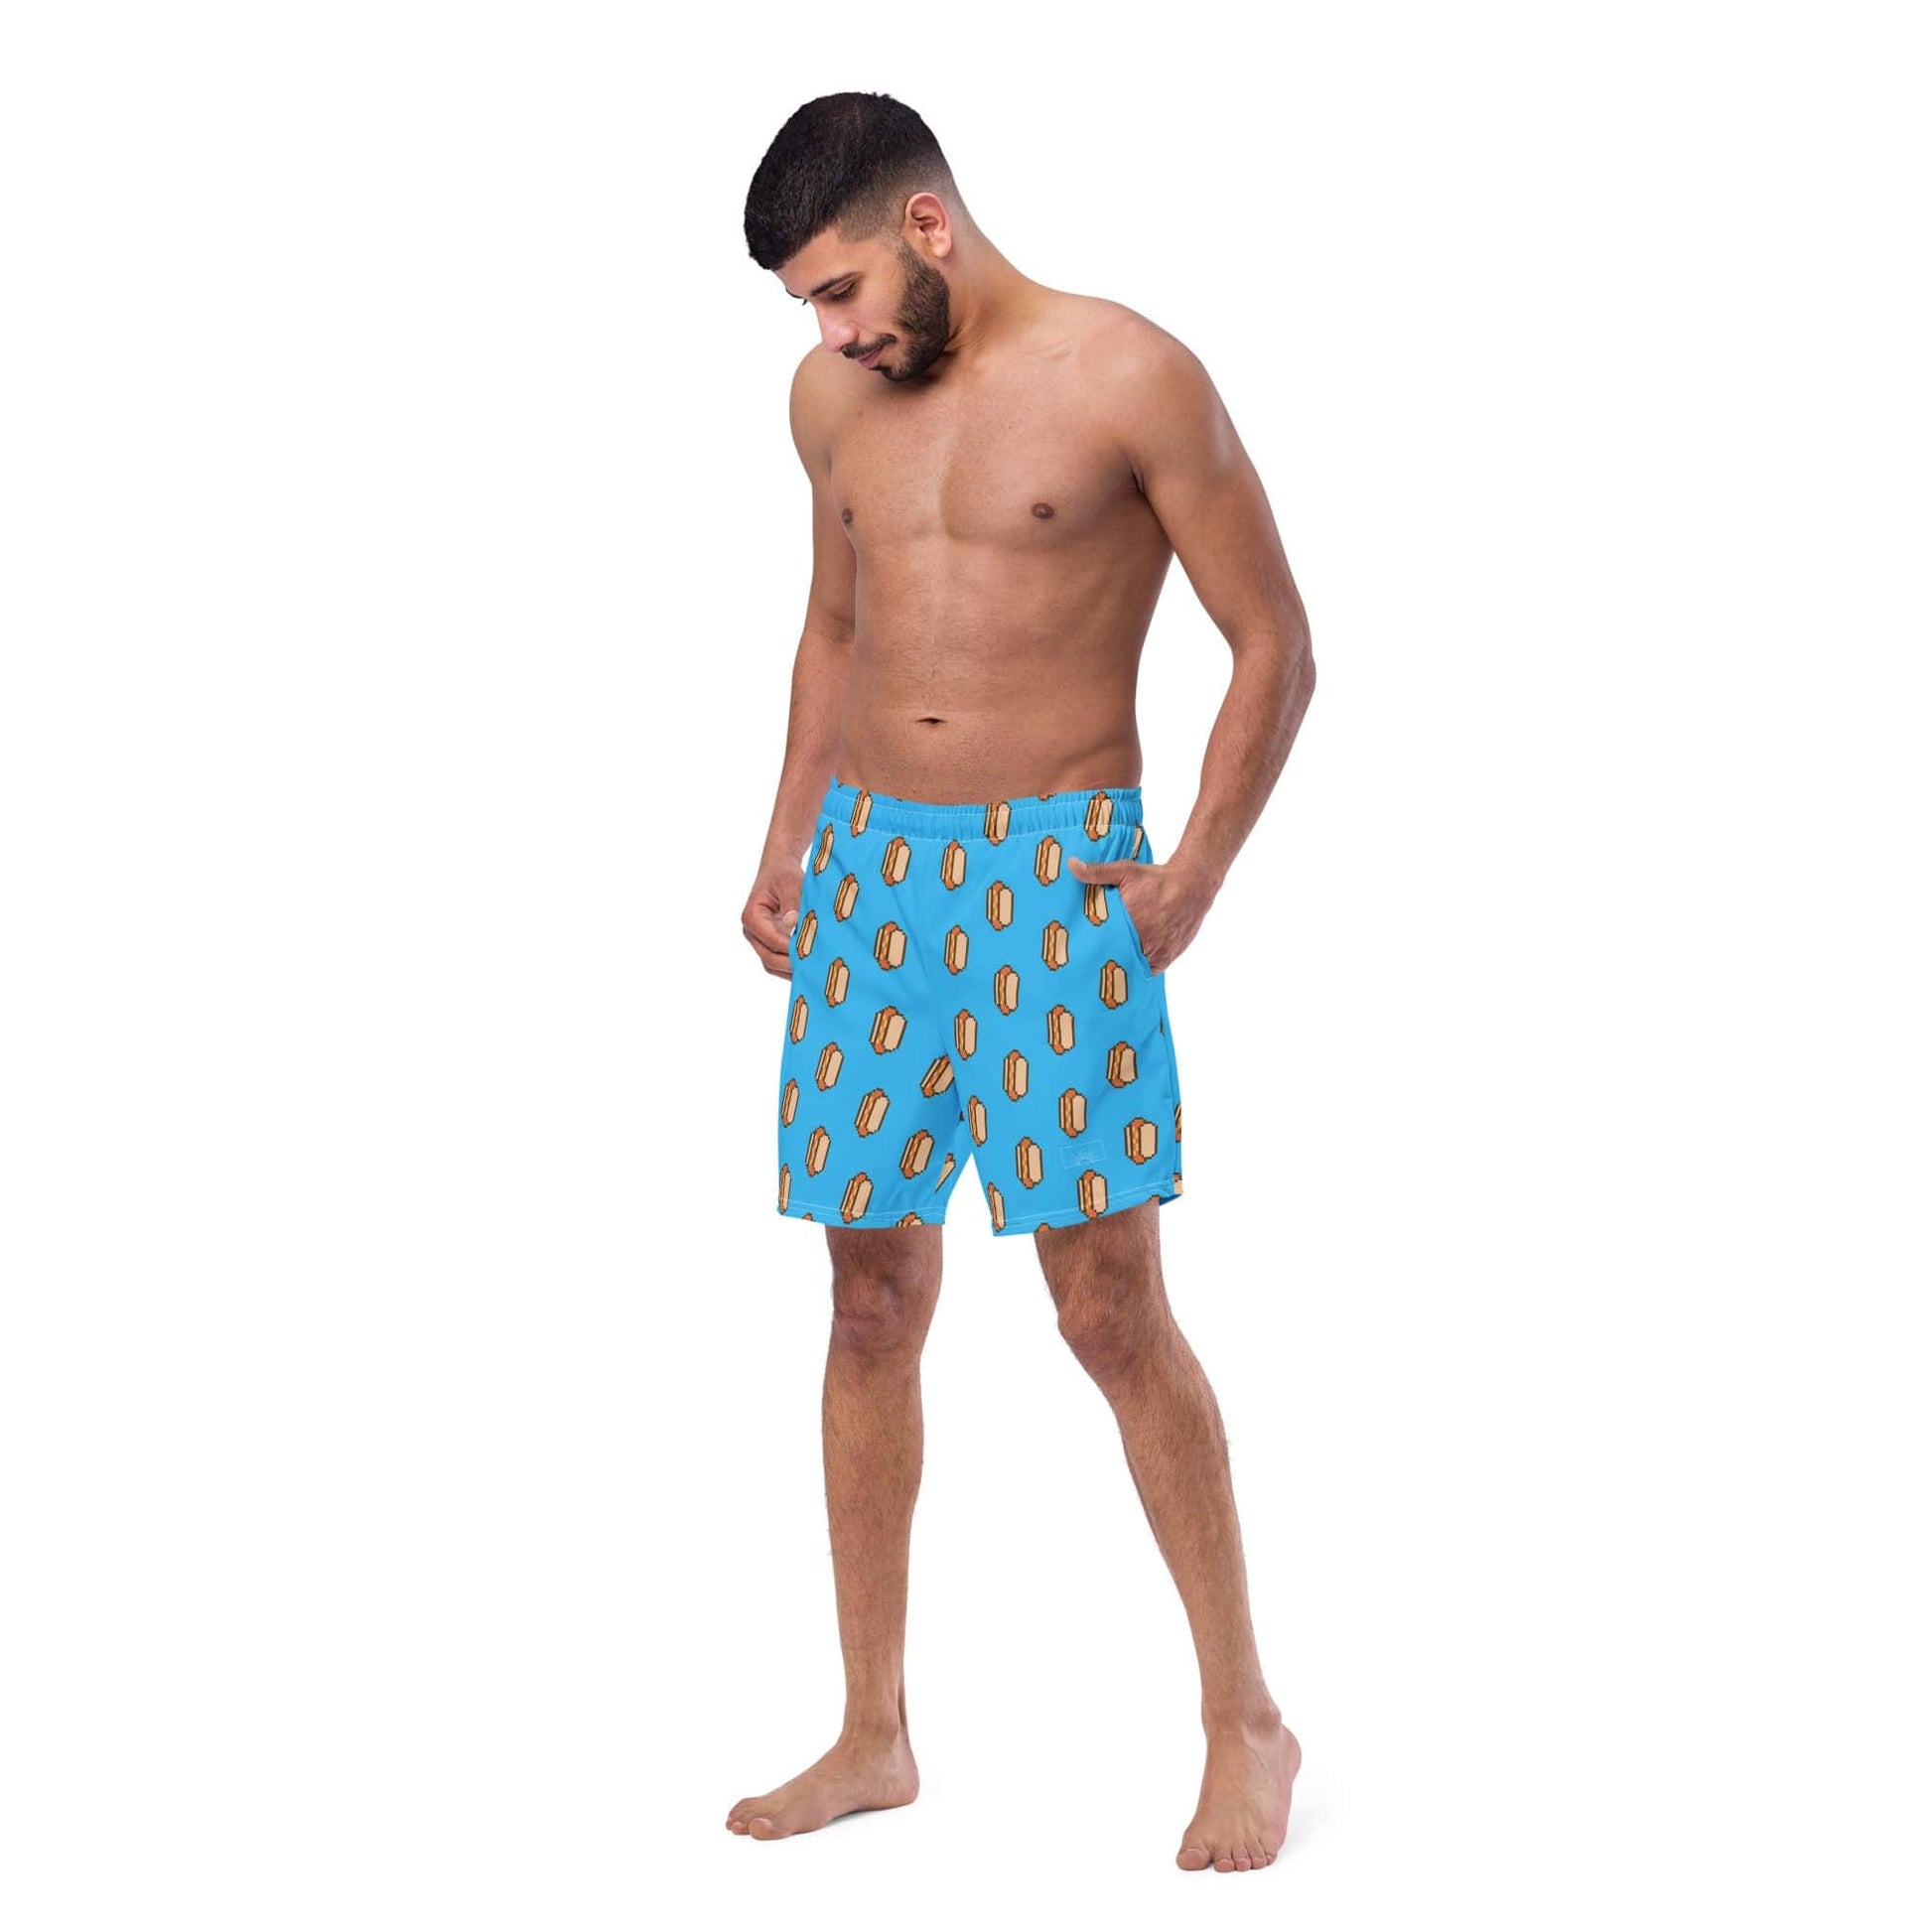 Local Summer Collective Glizzy Fest All-Over Print Recycled Boardshorts